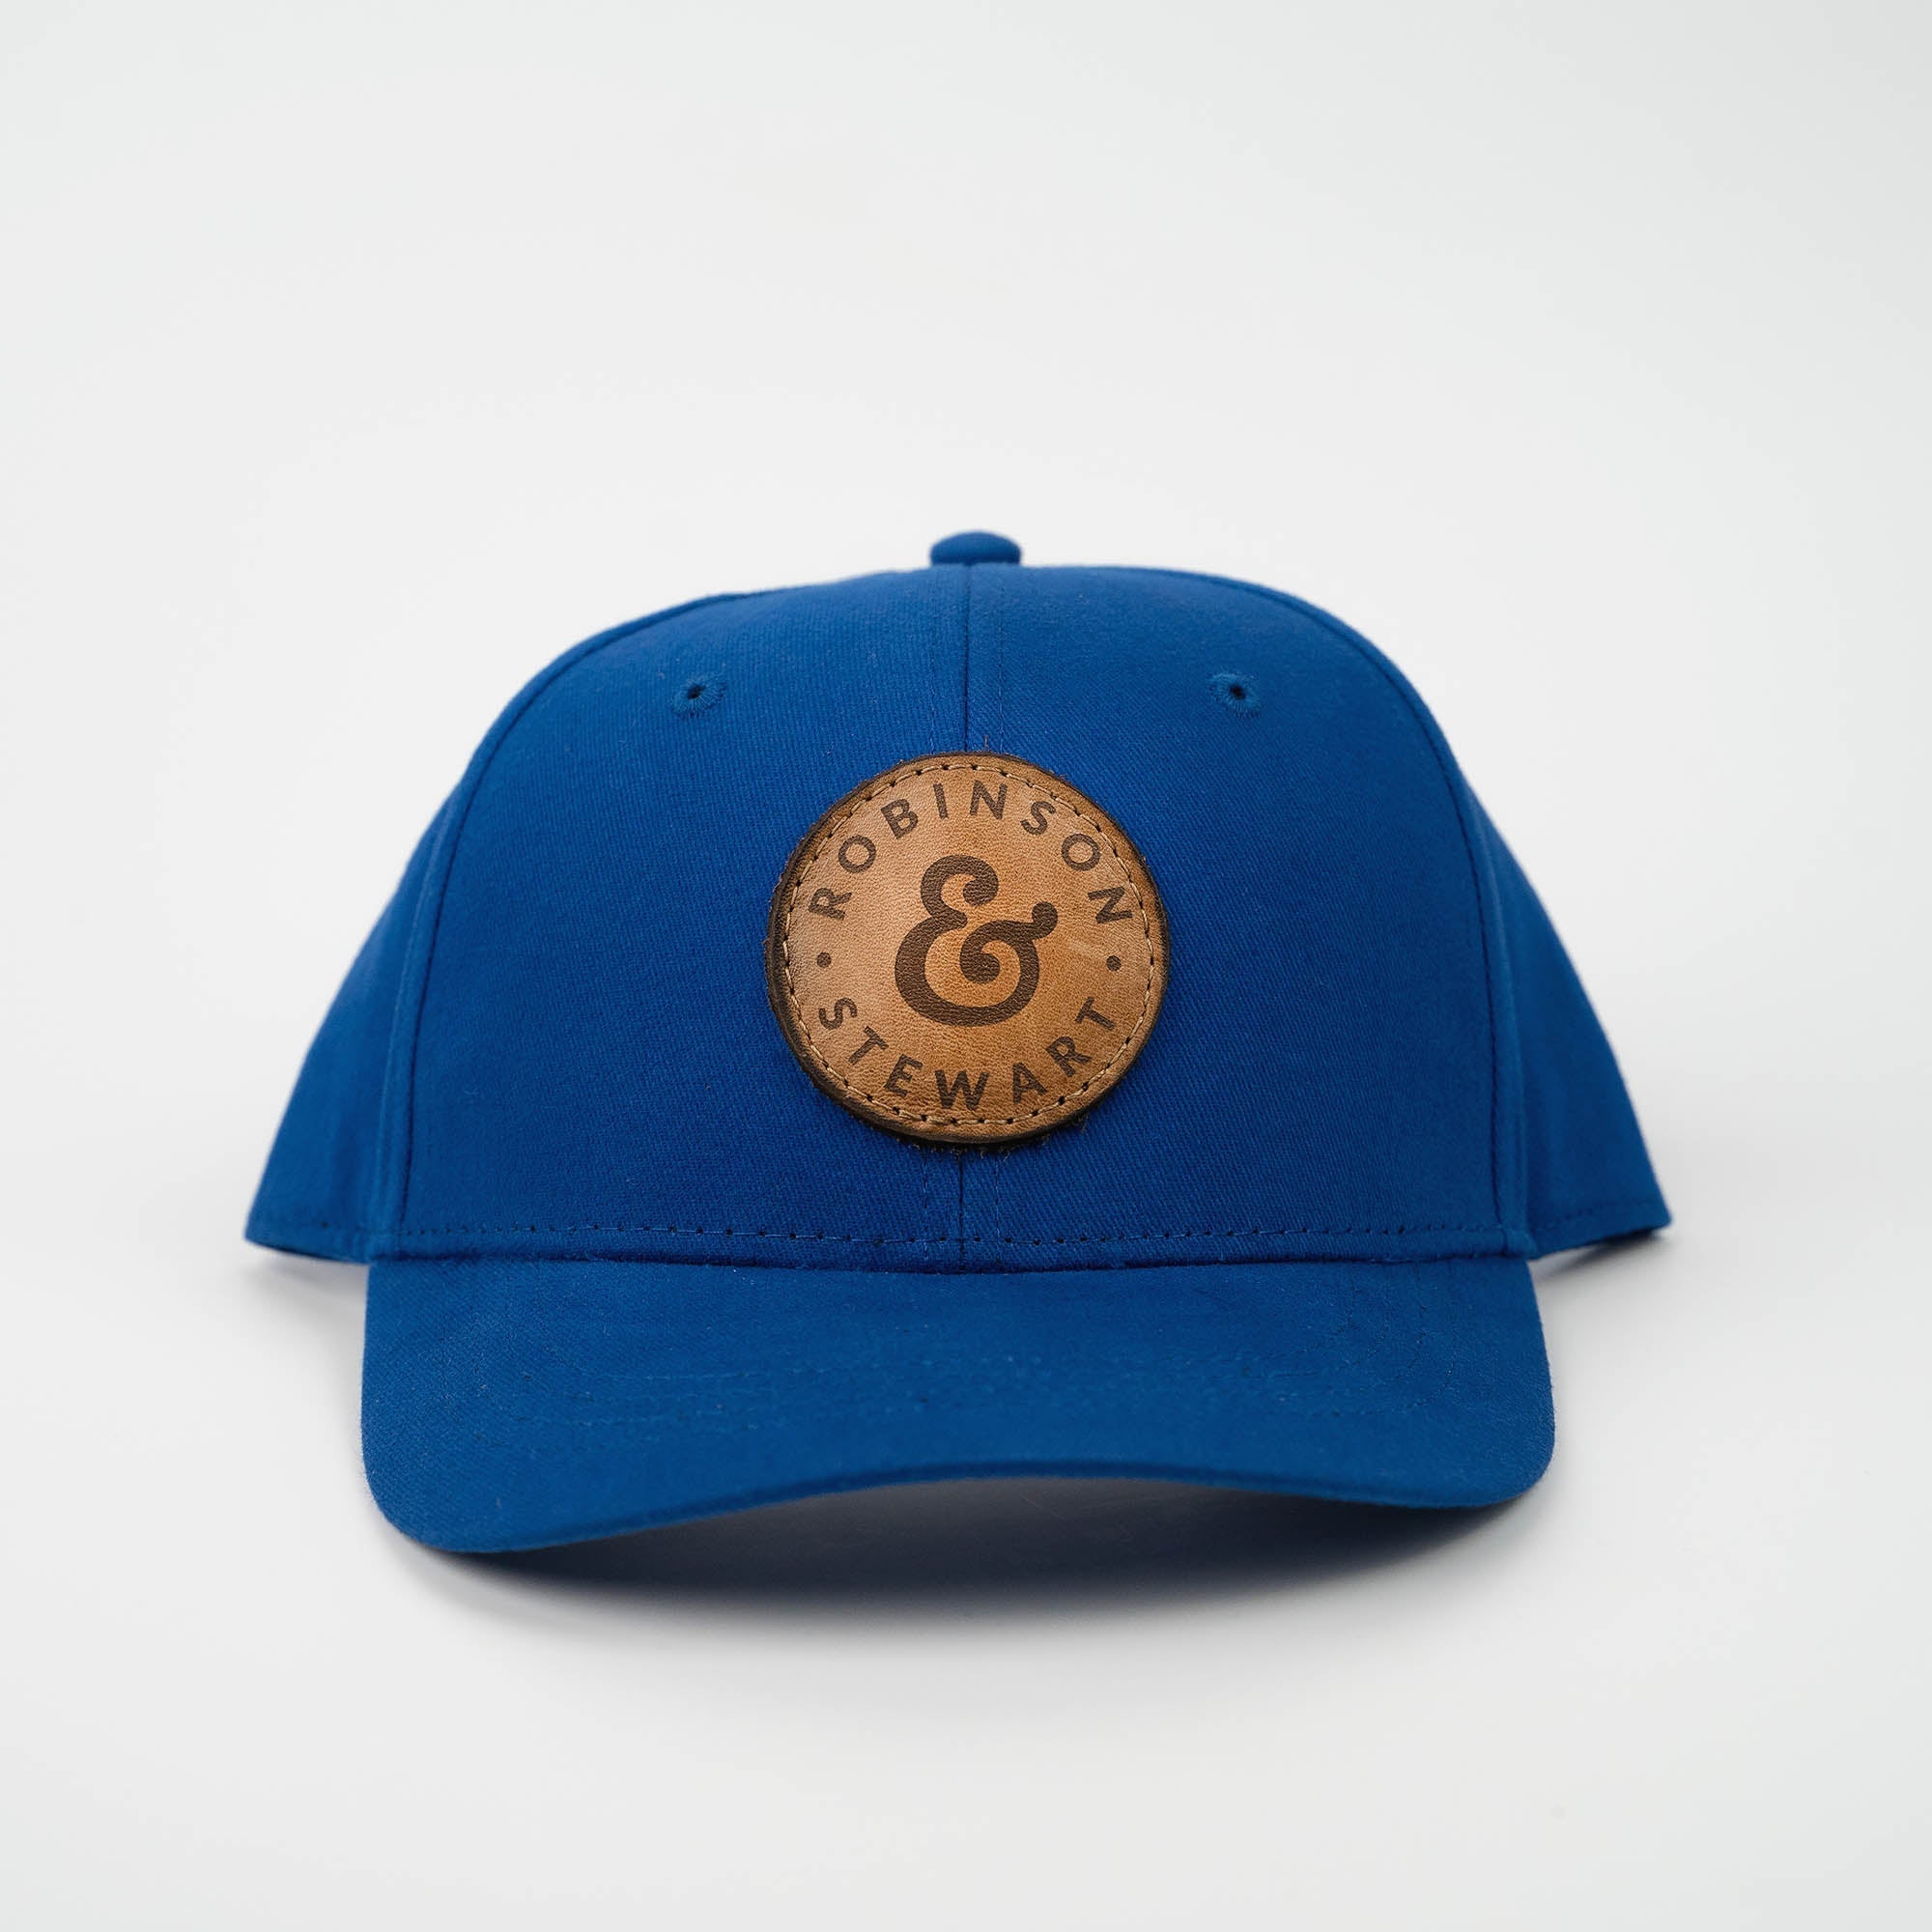 Lasered Leather Patch Kids Trucker Hat - OTTO 19-503 Youth 6 Panel Baseball Cap - Customized with YOUR LOGO